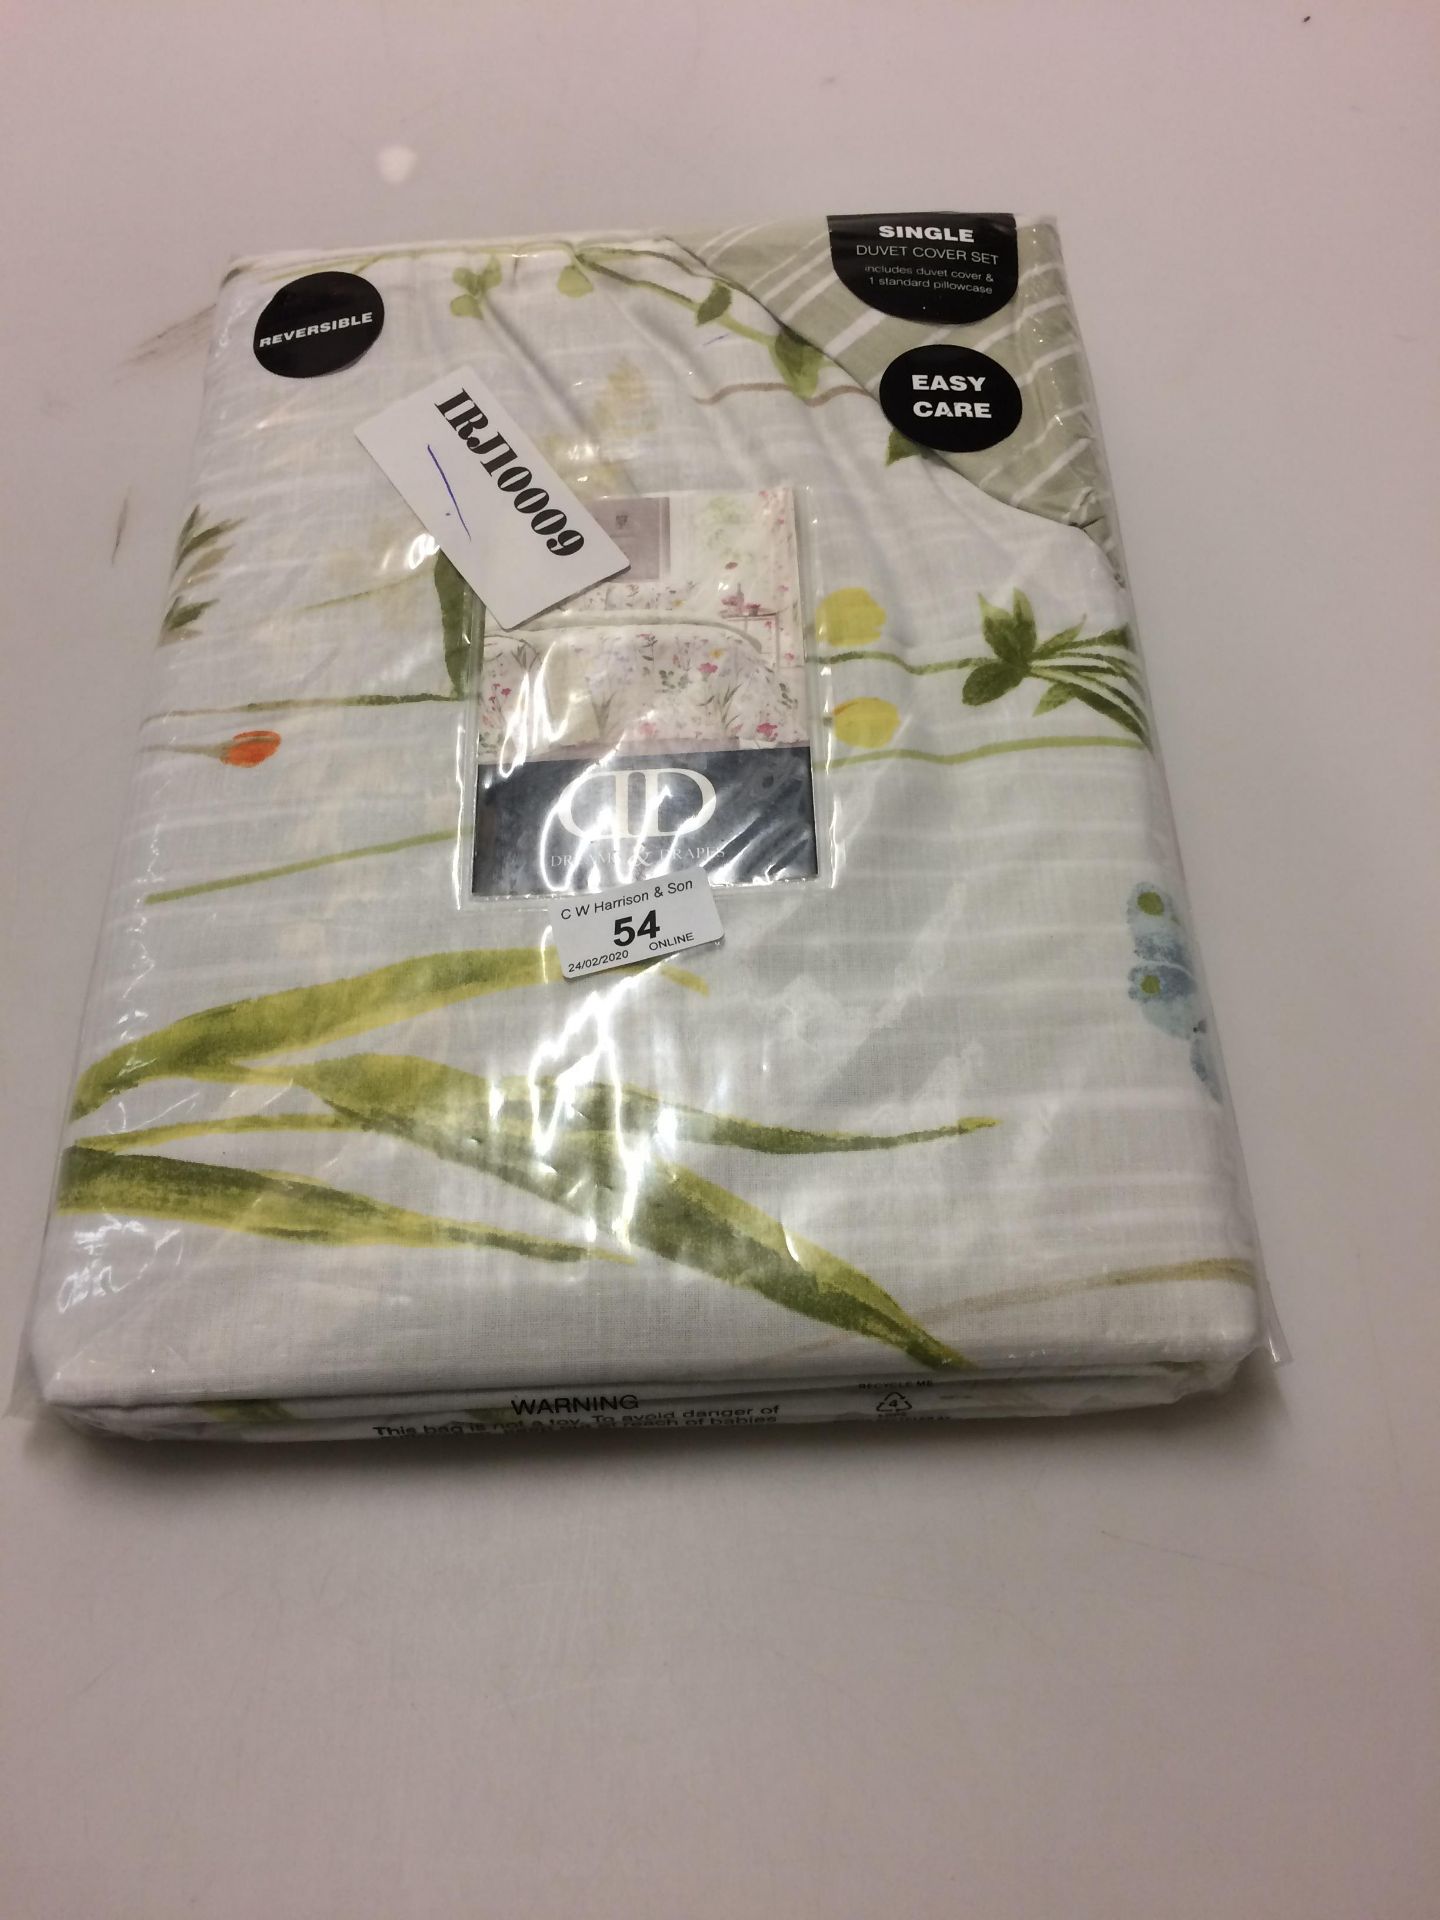 Laurens Duvet Cover Set by Lily Manorsin - Image 2 of 2